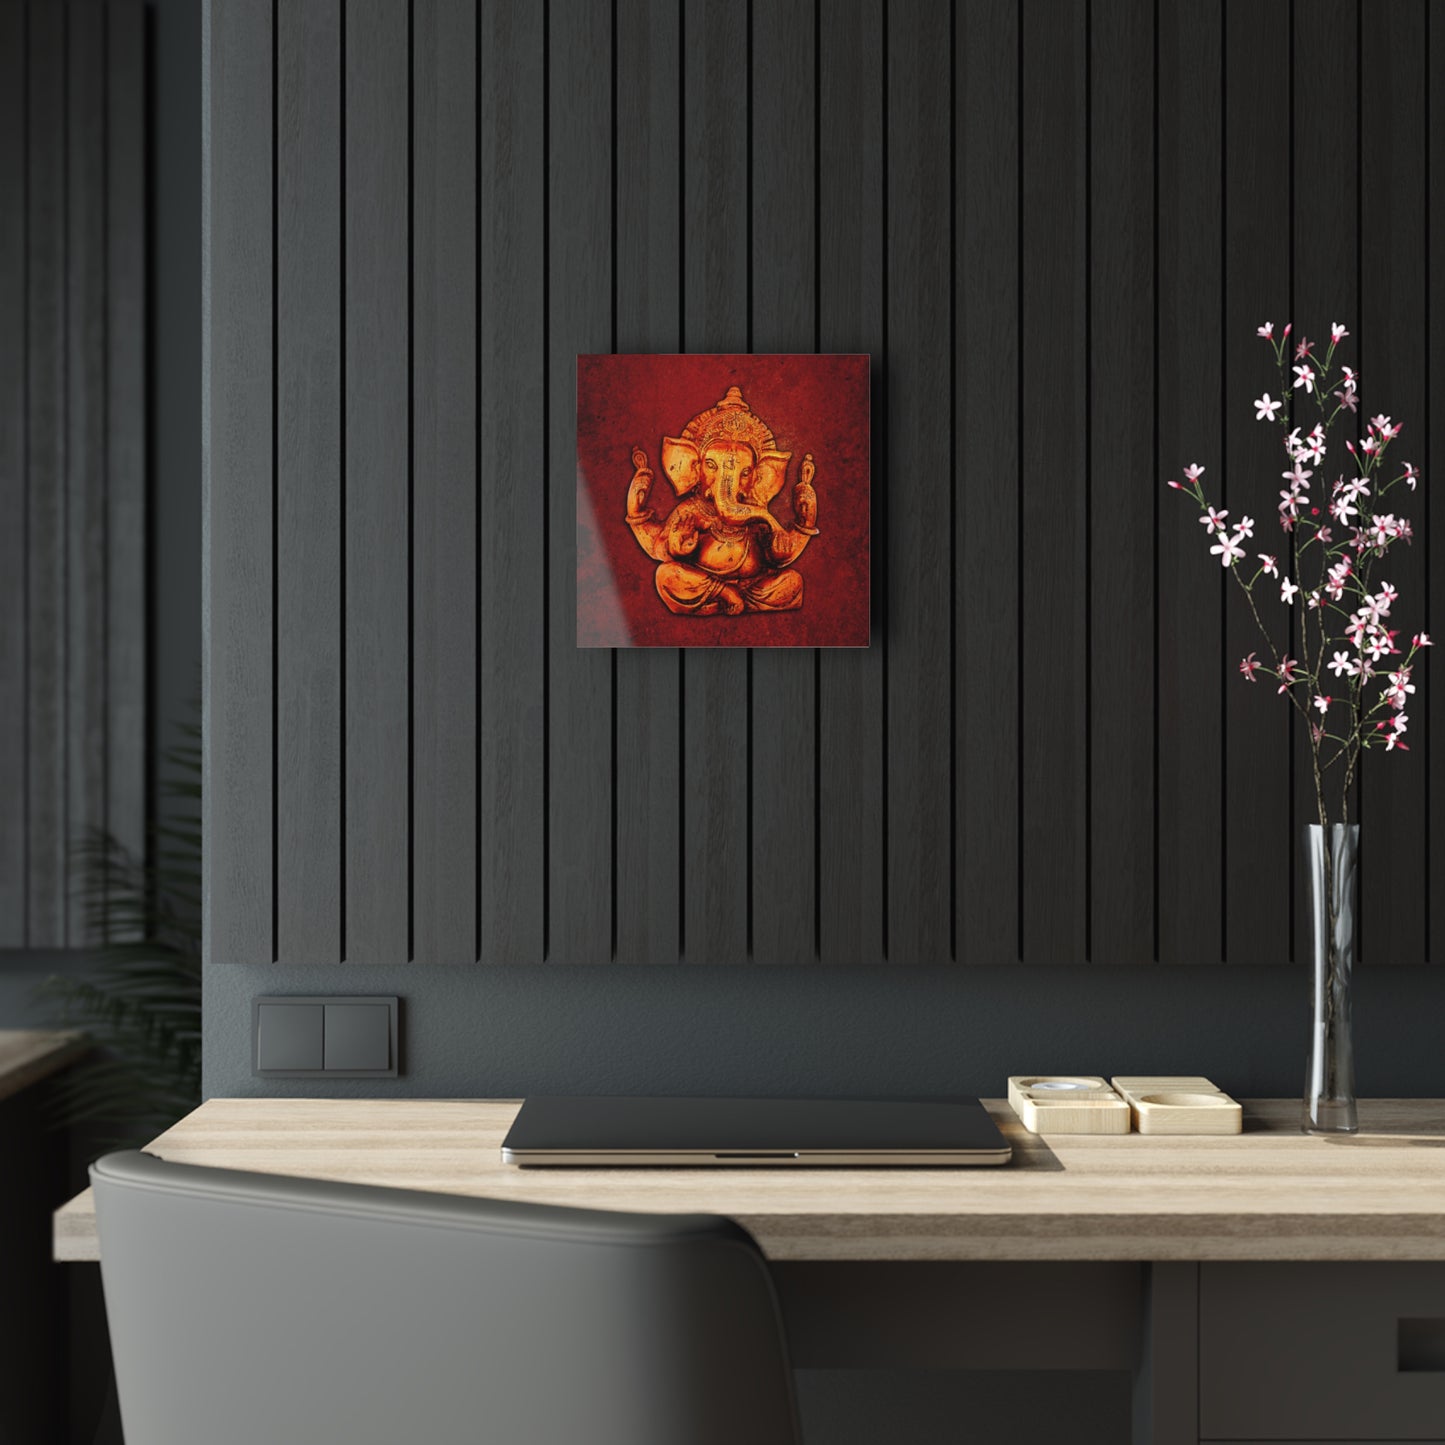 Golden Ganesha on a Distressed Lava Red Background Printed on Crystal Clear Acrylic Panel 12x12 hung